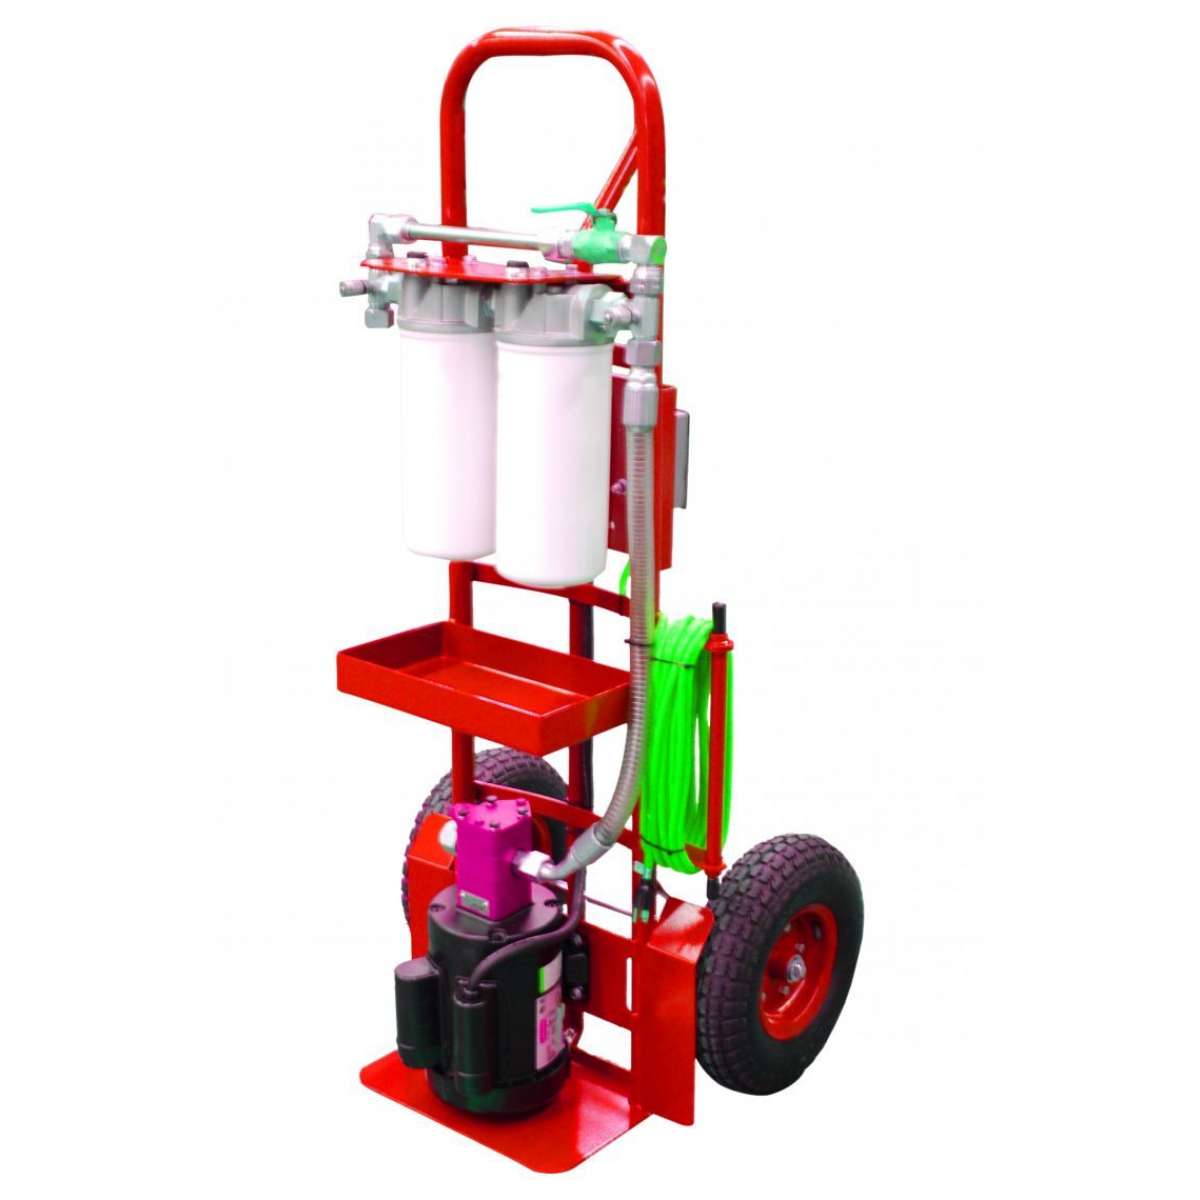 Standard M Series FilterCart for Gear Oil 1HP 2GPM